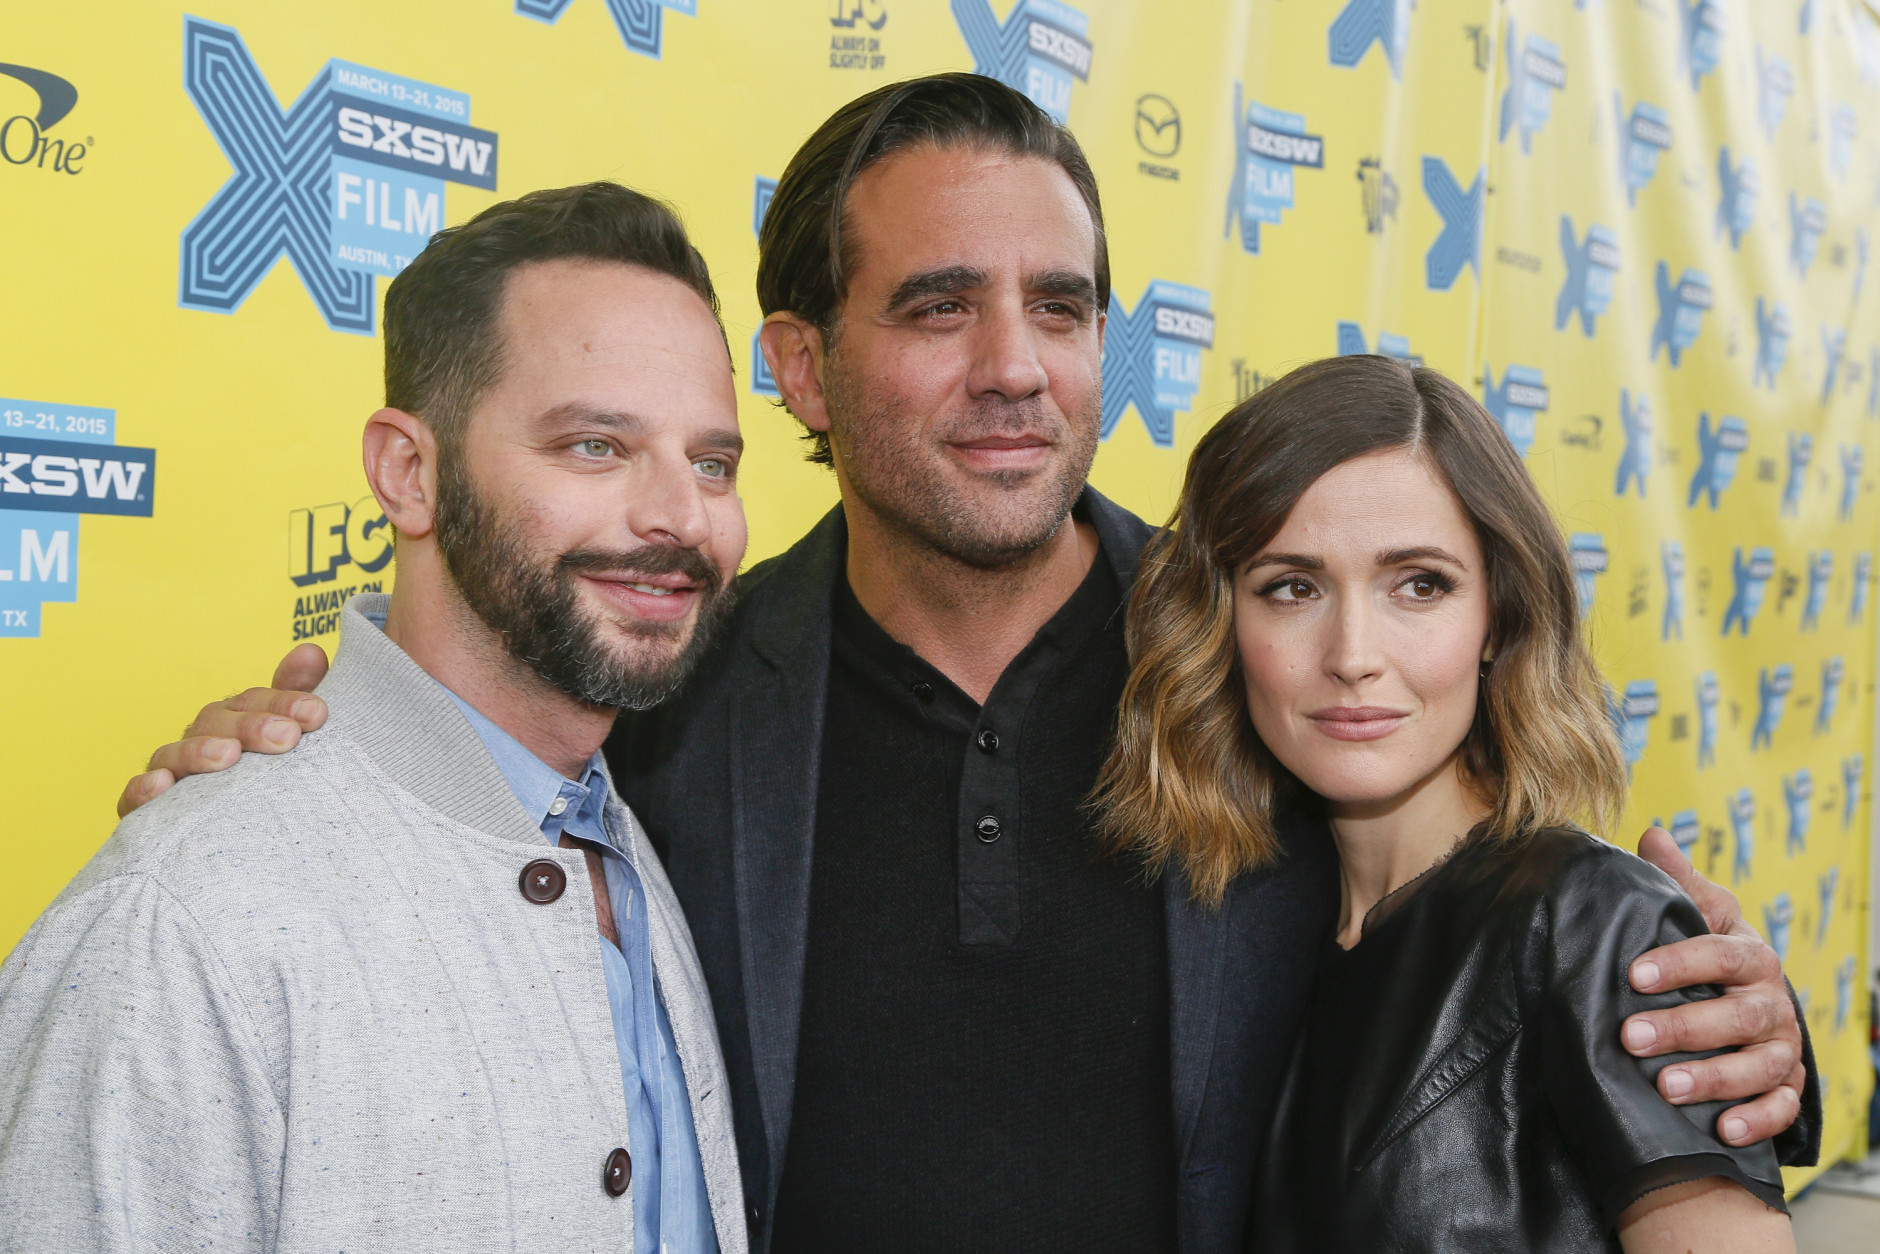 Nick Kroll, Bobby Cannavale and Rose Byrne, from left, walk the red carpet for "Adult Biginners" during the South by Southwest Film Festival on Sunday, March 15, 2015 in Austin, Texas. (Photo by Jack Plunkett/Invision/AP)